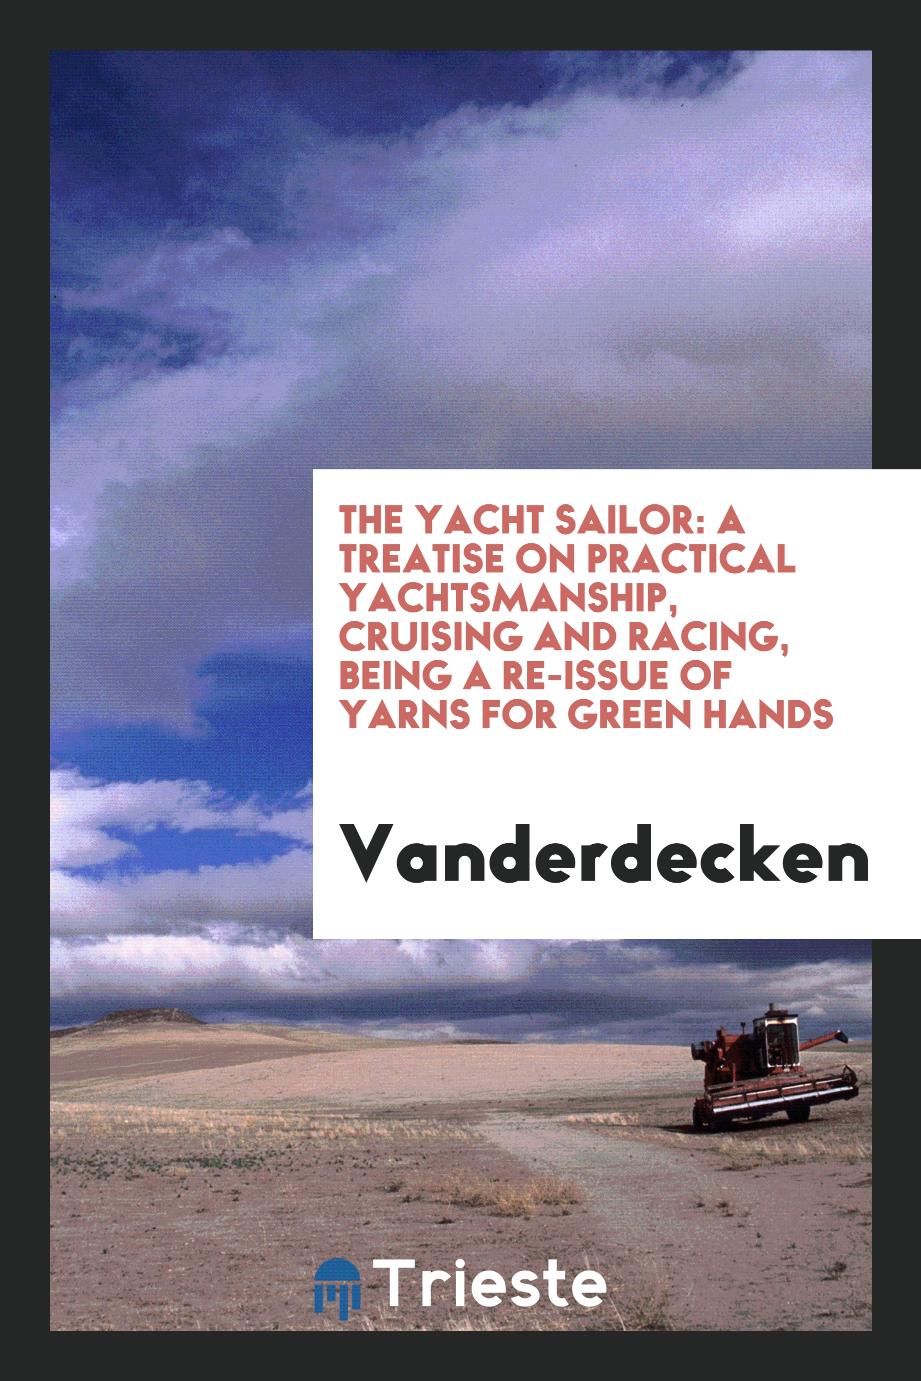 The Yacht Sailor: A Treatise on Practical Yachtsmanship, Cruising and Racing, Being a Re-Issue of Yarns for Green Hands